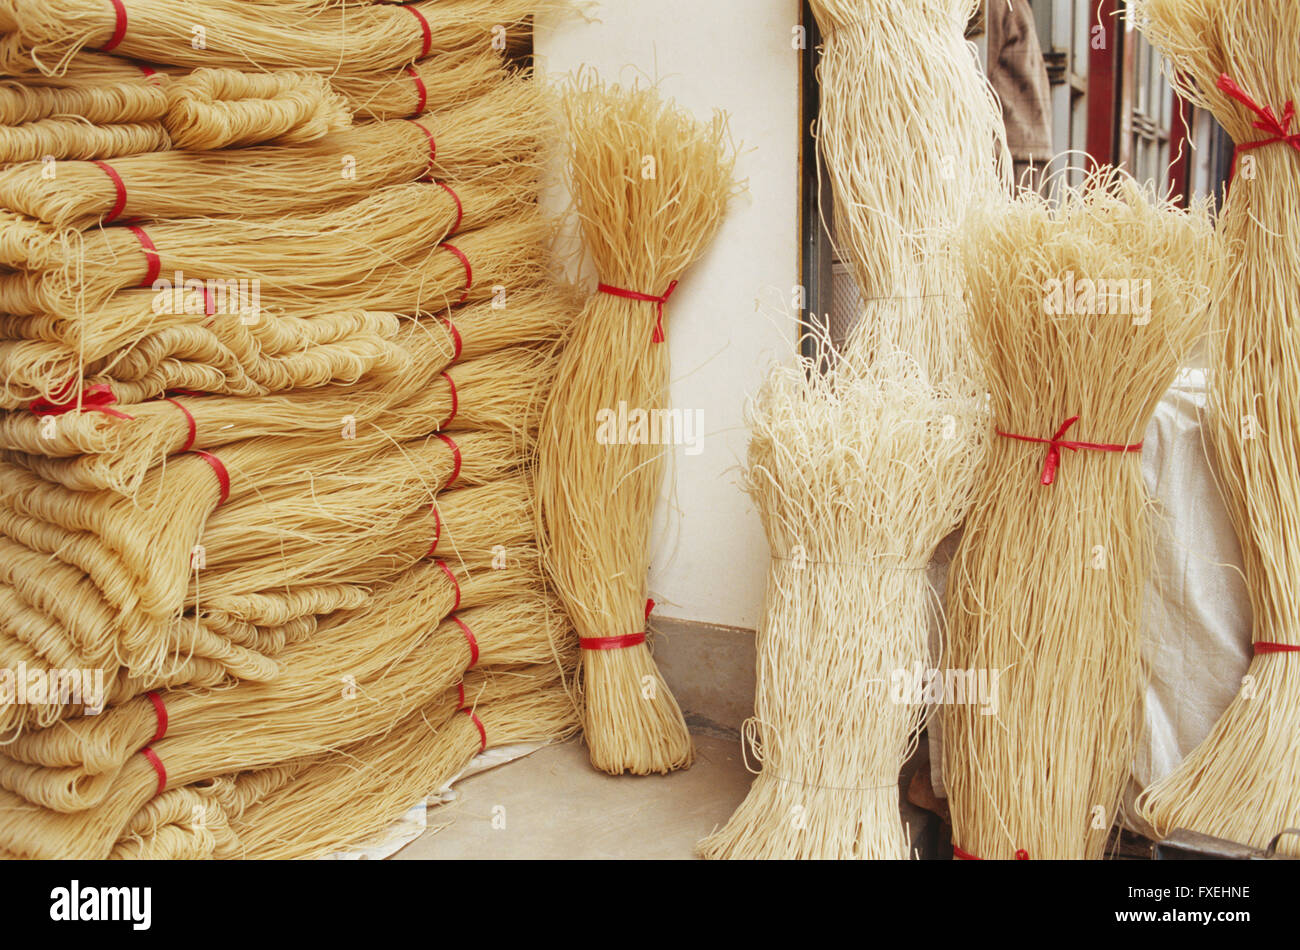 China, Gansu, Linxia, bunches of dry noodles tied with red ribbons and ready for sale. Stock Photo